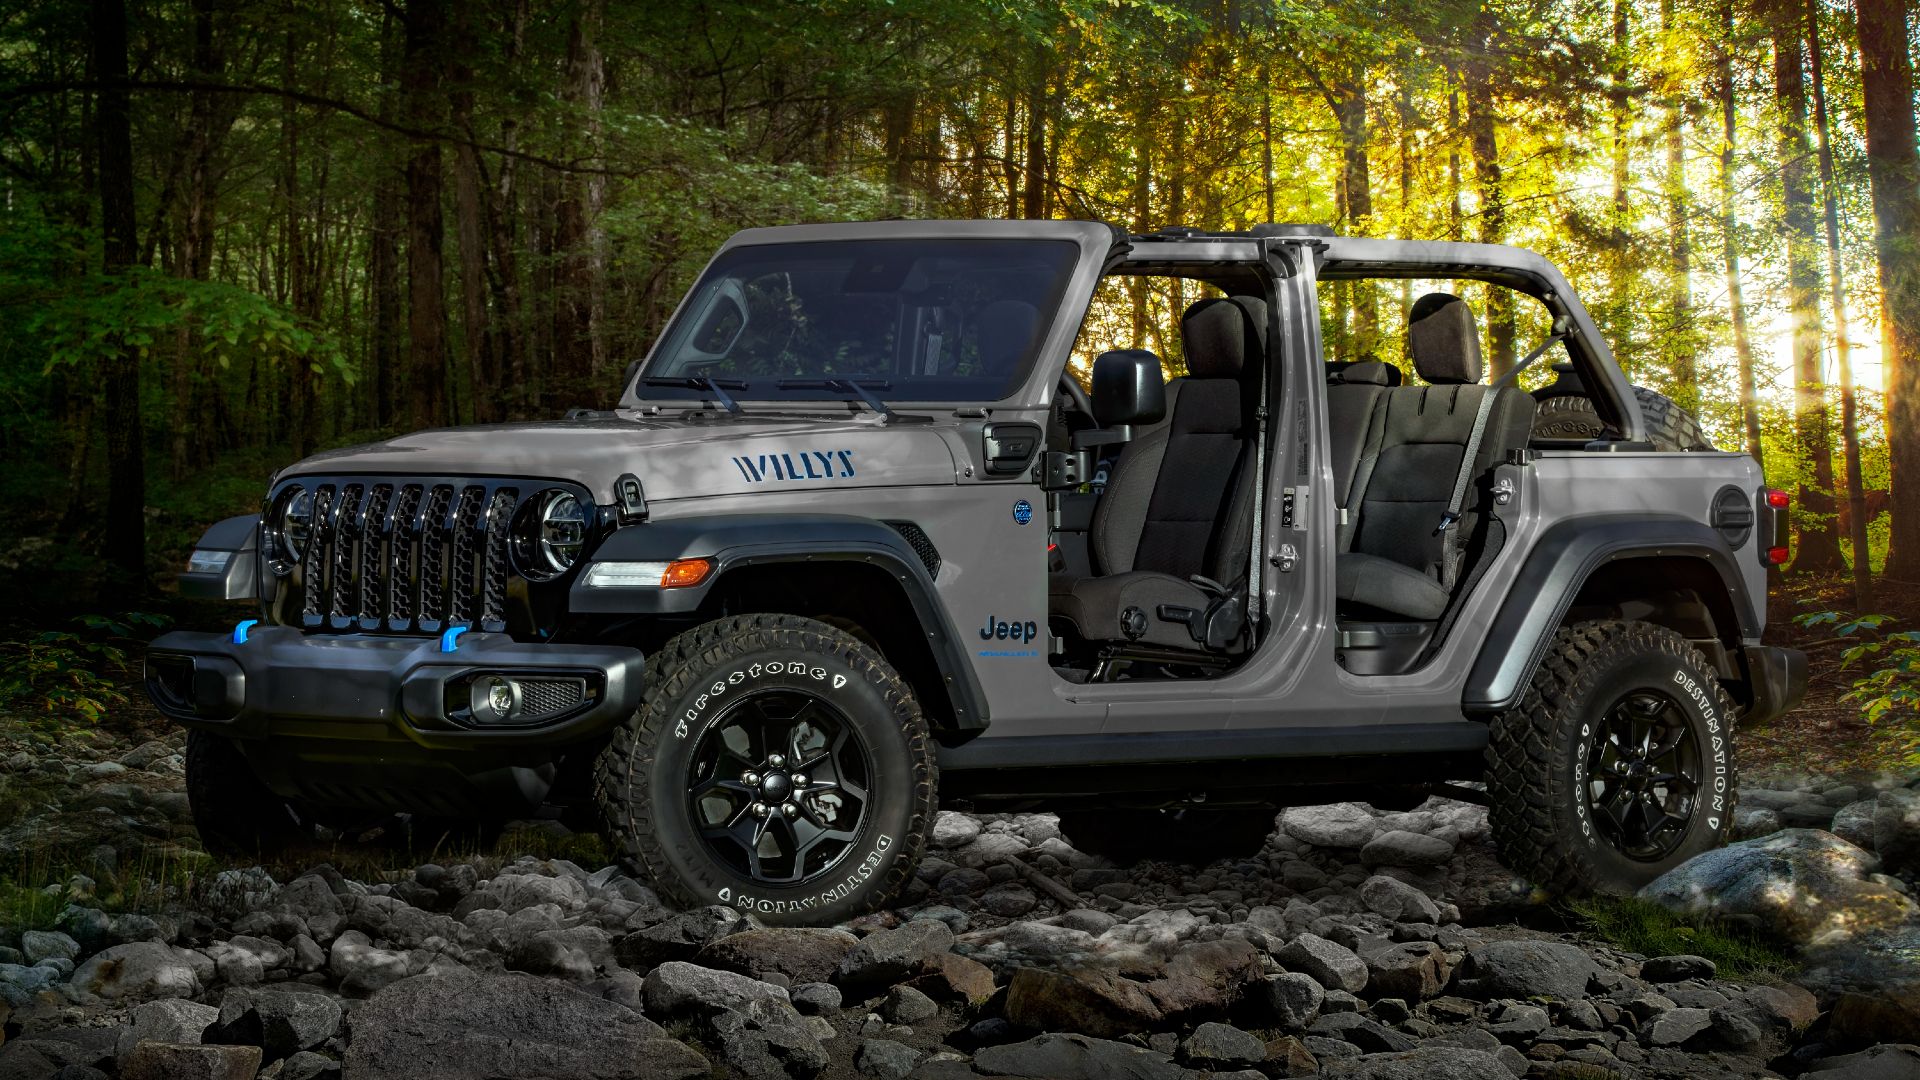 10 Reasons Why The Jeep Wrangler 4xe Is A Step In The Right Direction